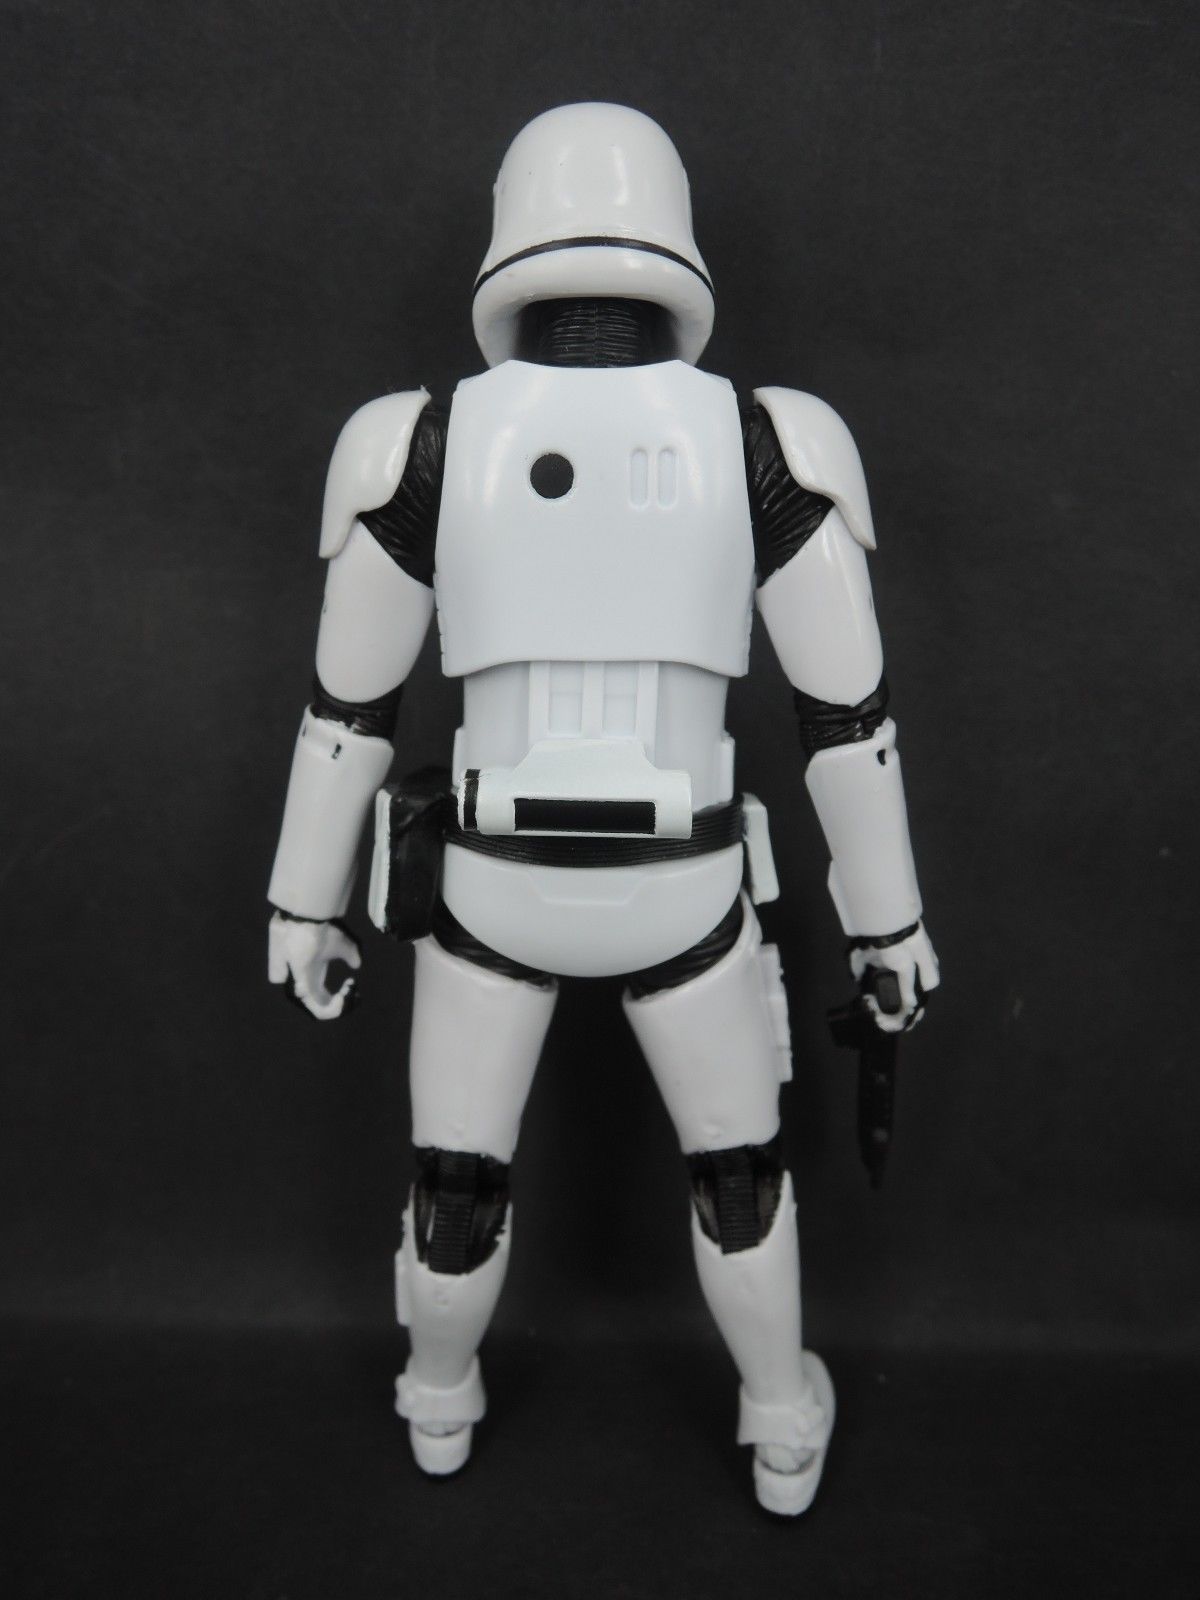 http://www.starwars-universe.com/images/actualites/collection/hasbro/stormtrooper-tfa-02.JPG